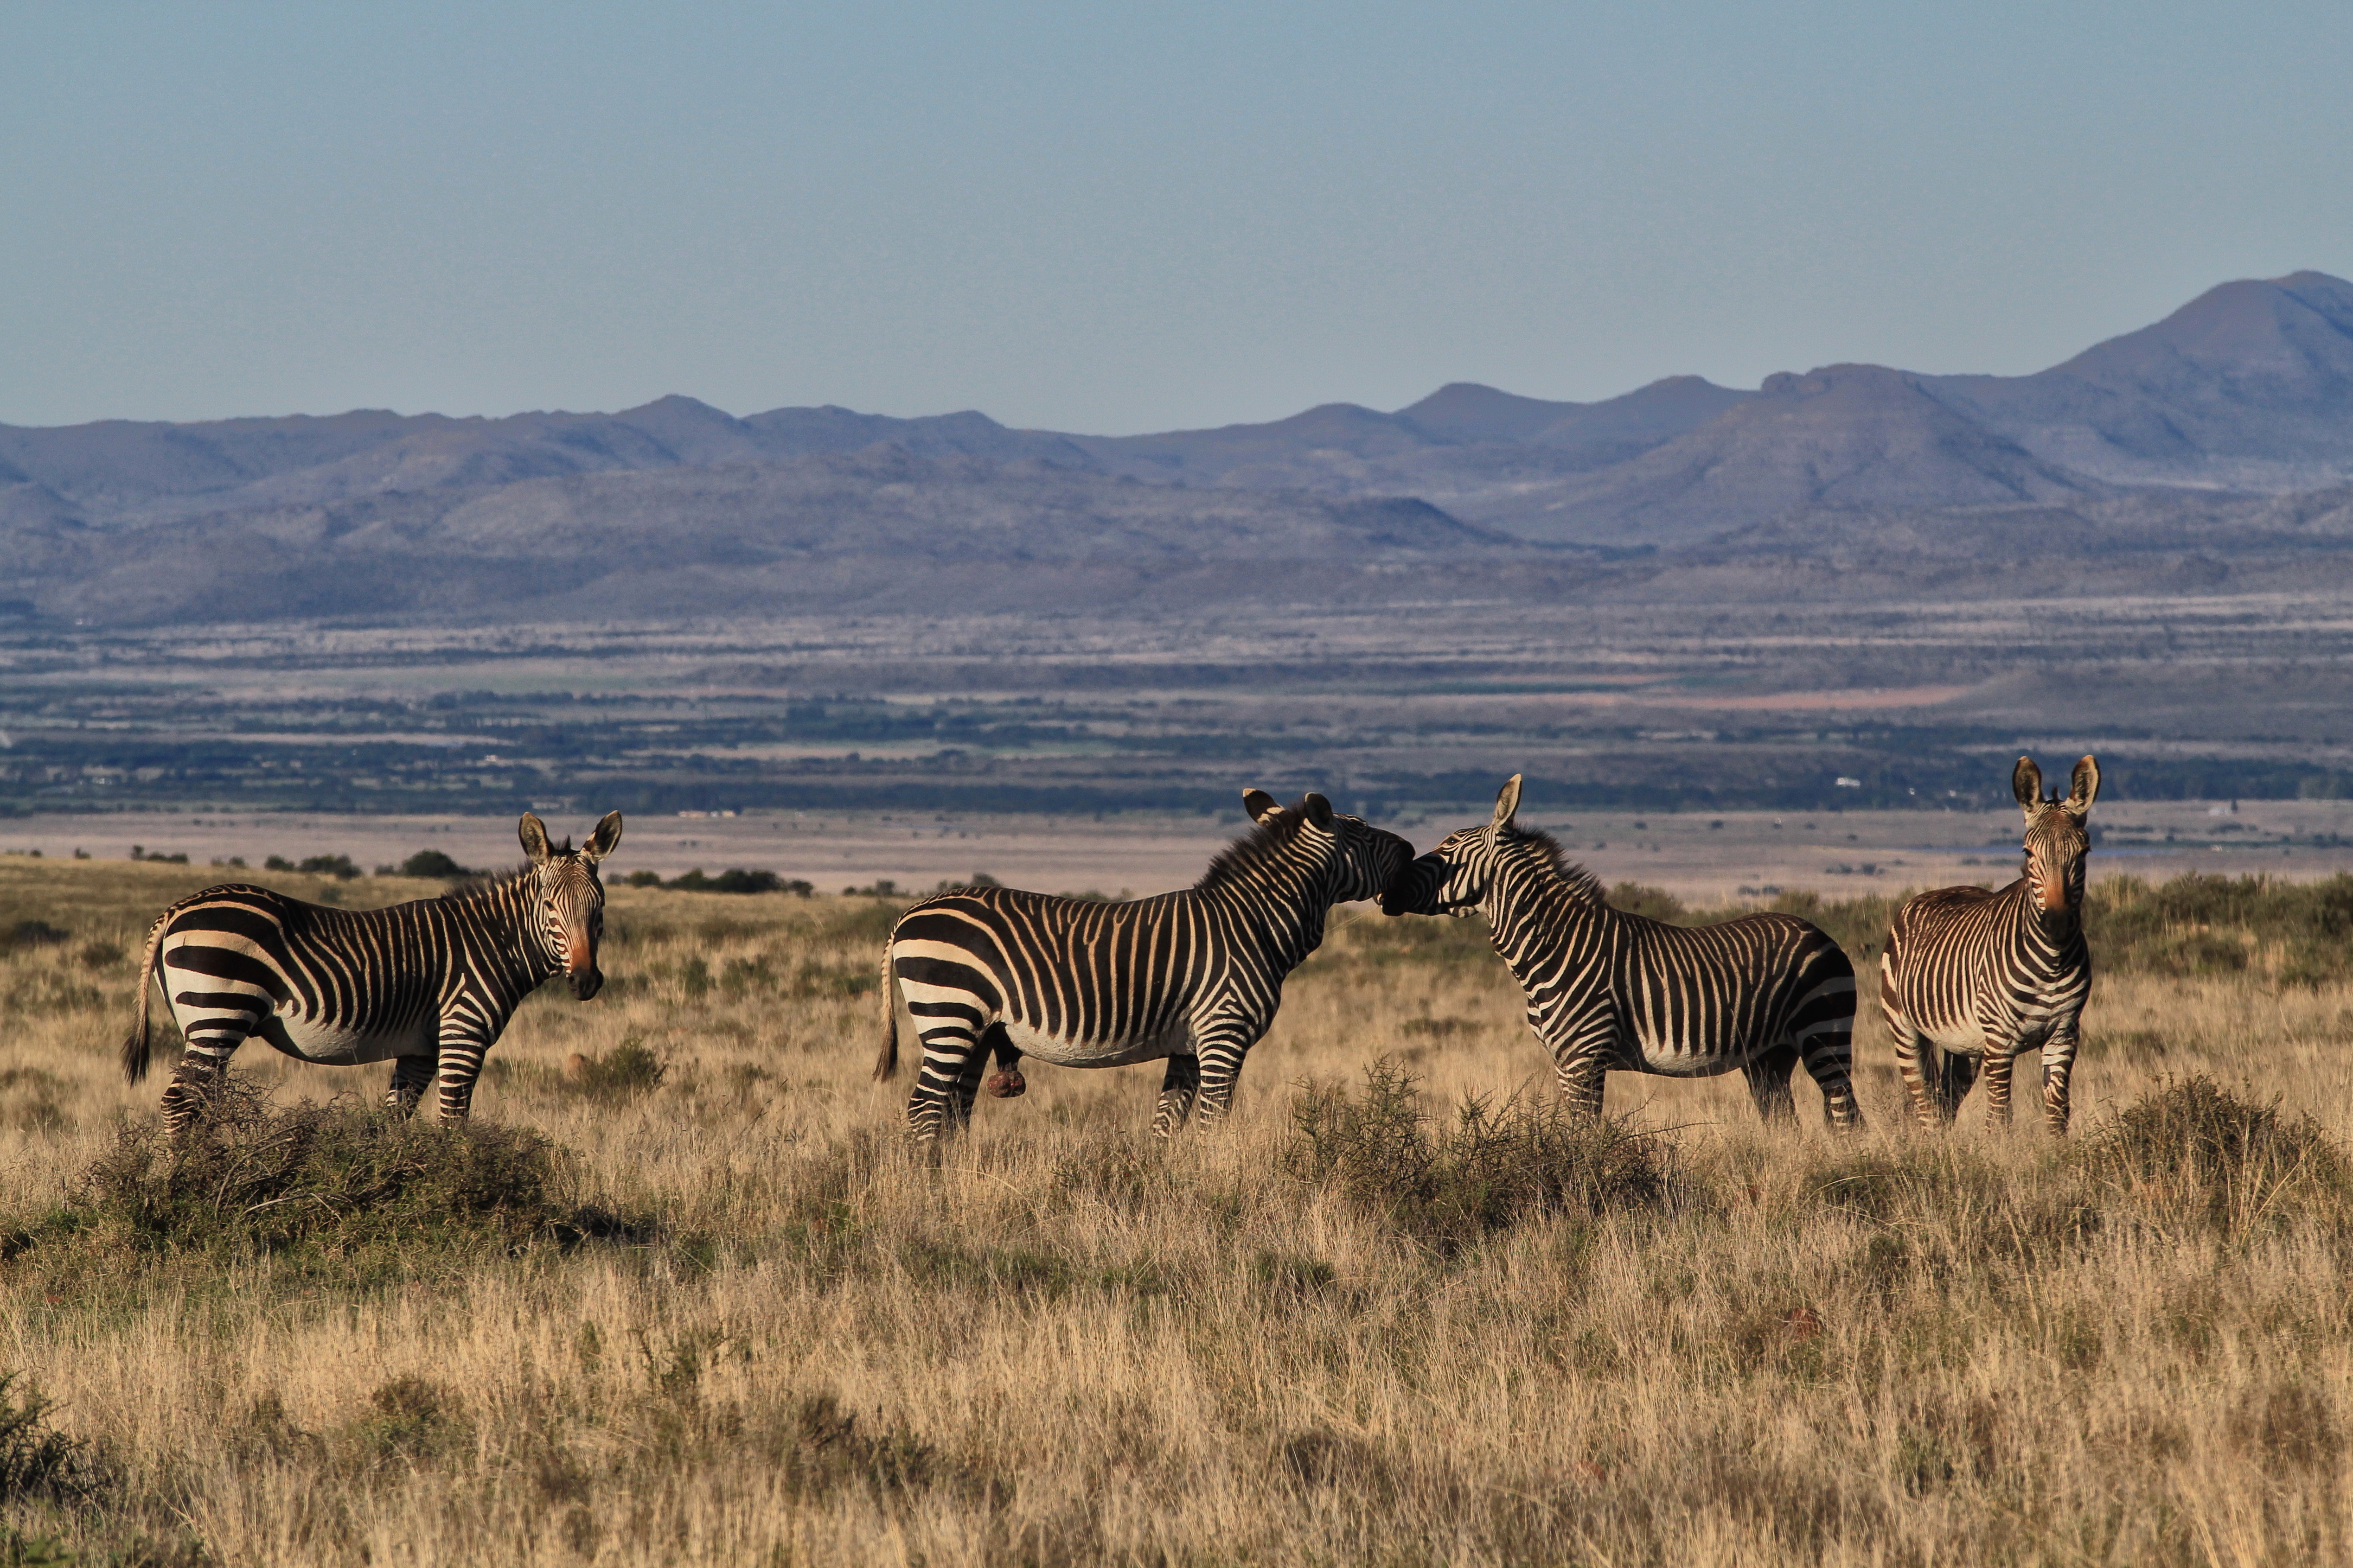 Breeding herds of mountain zebras typically have a dominant stallion with a harem of up to five mares and their foals. The mares will usually stay with their stallion for life.